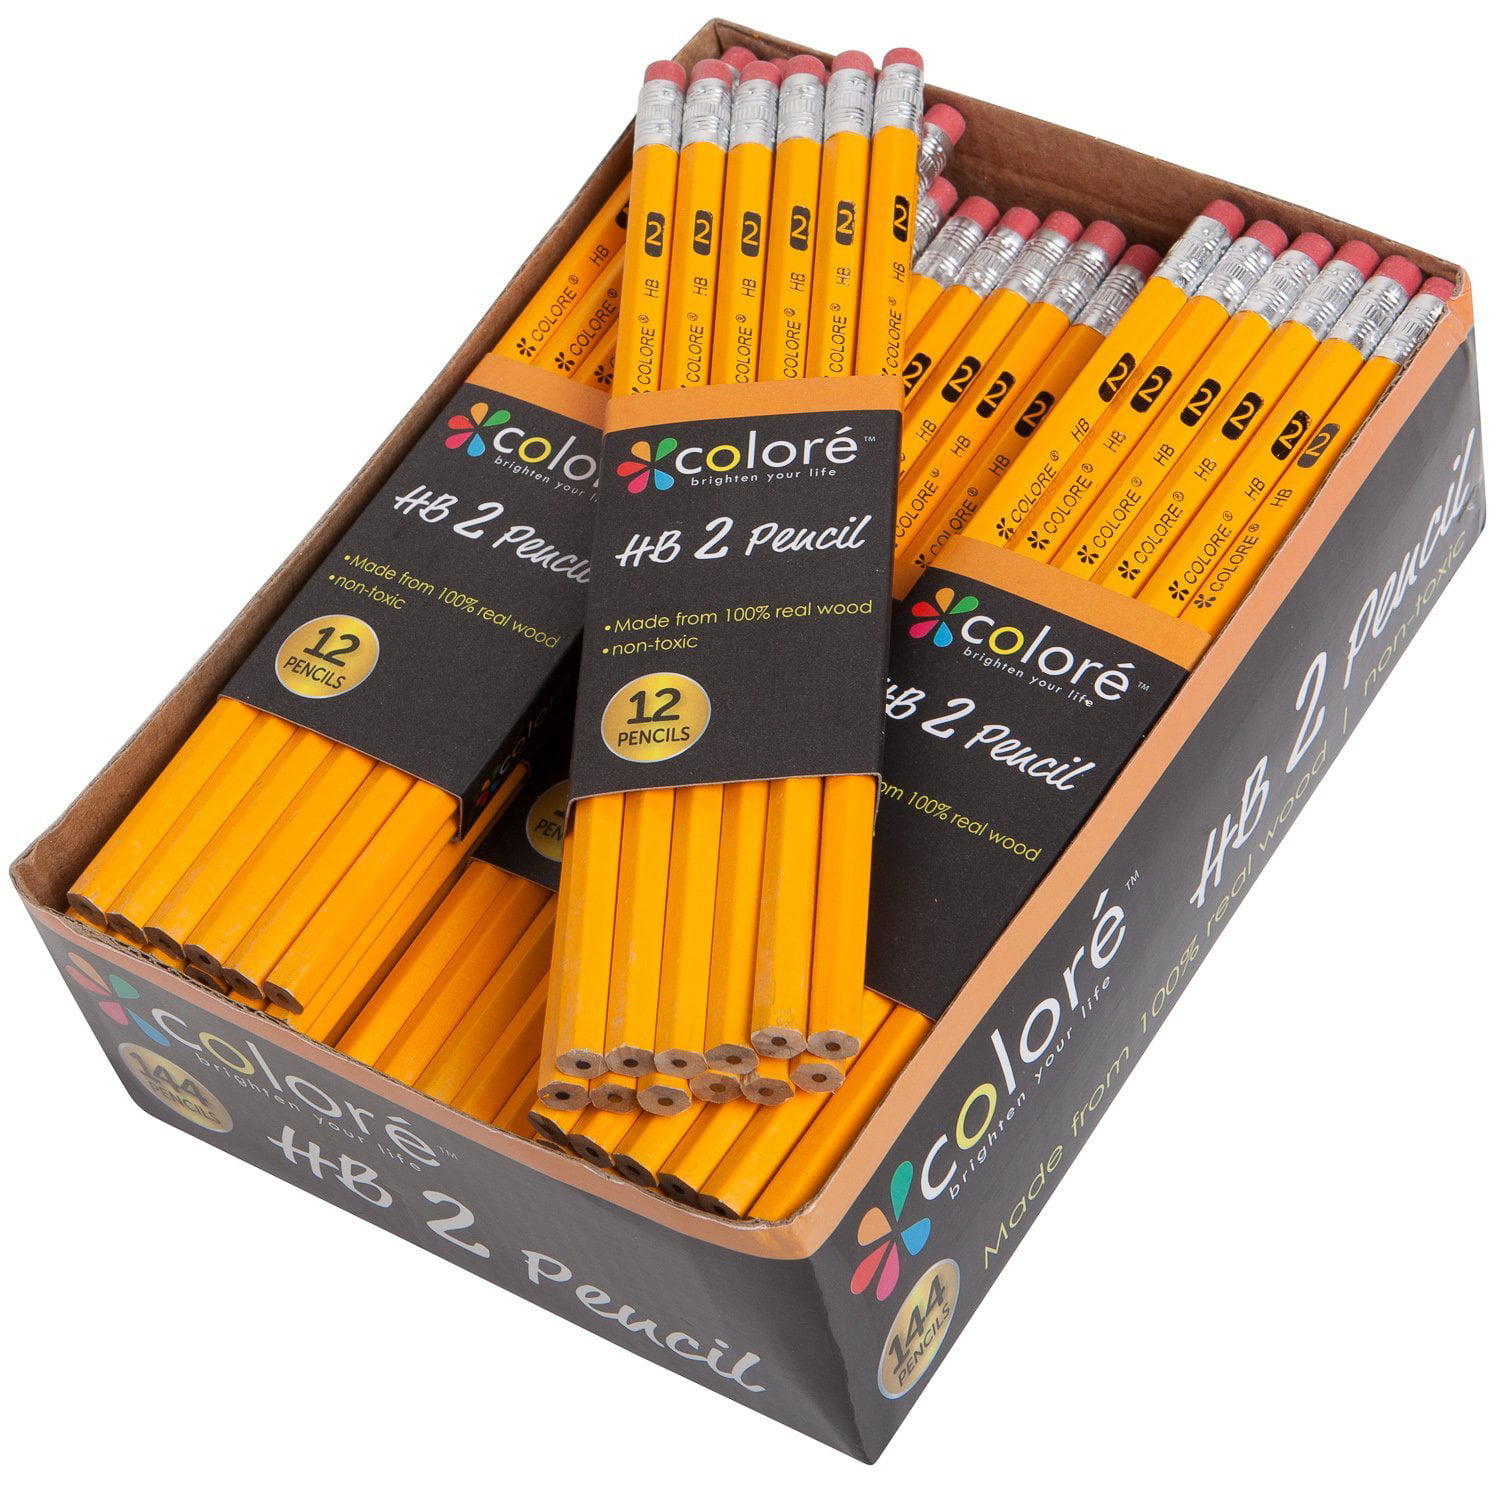 By Essential Arts Eco Friendly Responsibly Sourced Wood Office and DIY Class Pack of 144 HB Wooden C2 Hexagonal Drawing and Sketching Pencils with Eraser for School Classroom